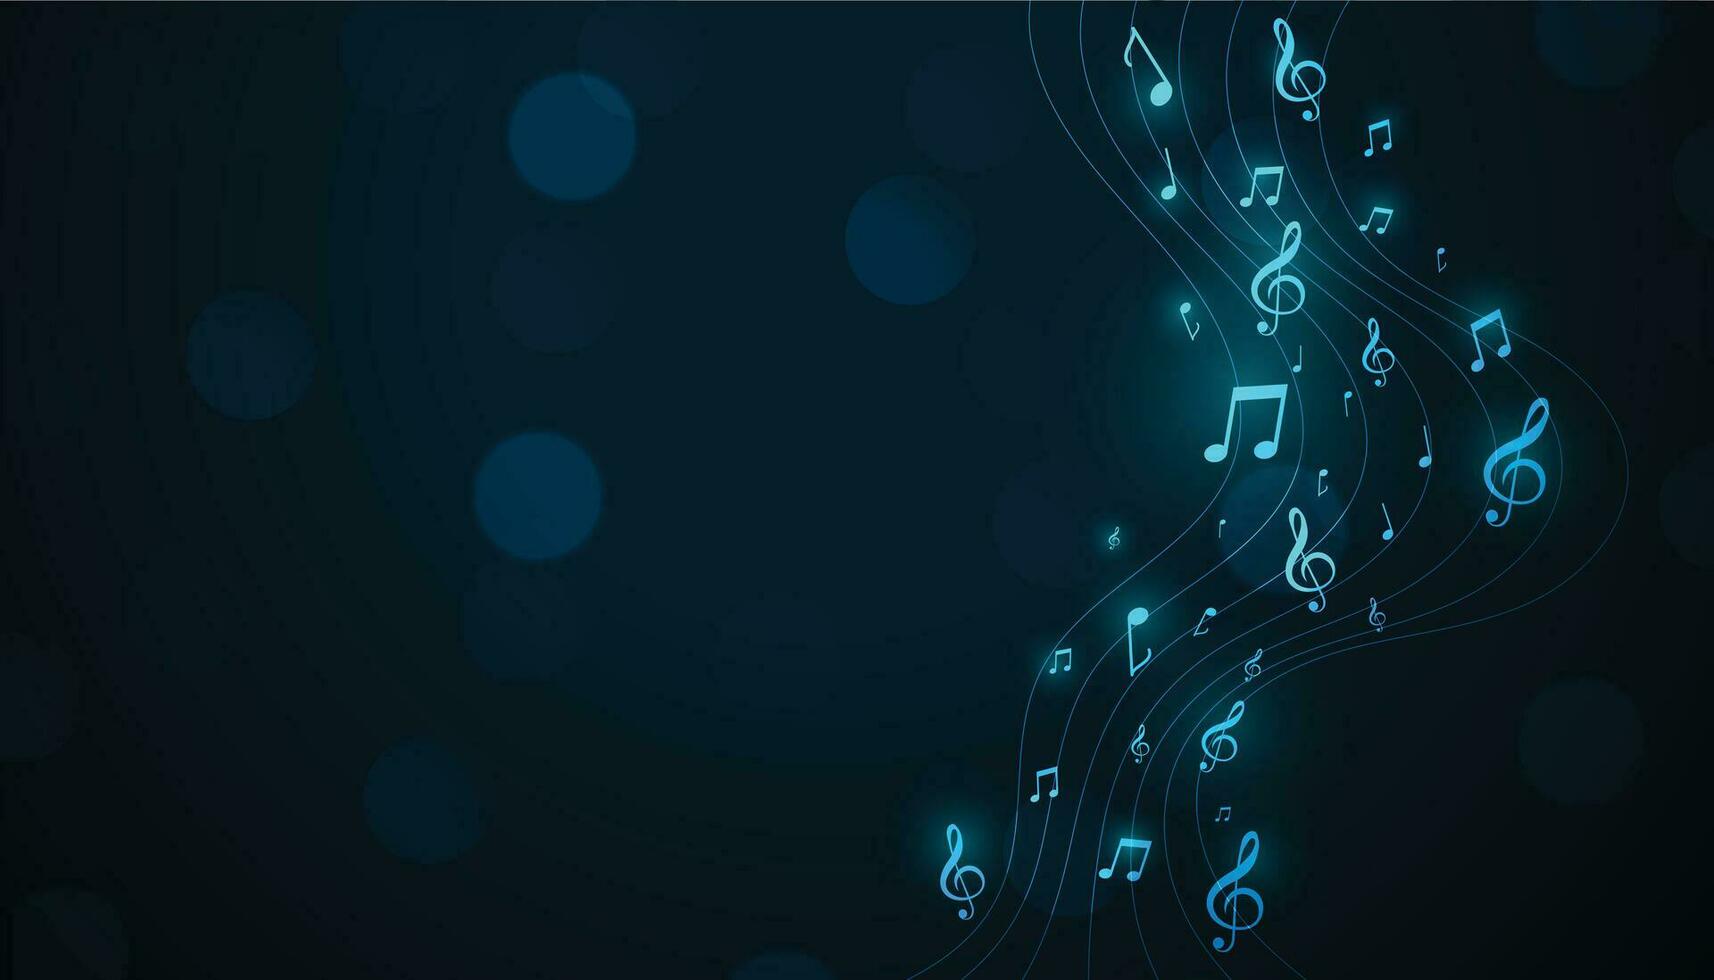 glowing musical pentagram background with sound notes vector